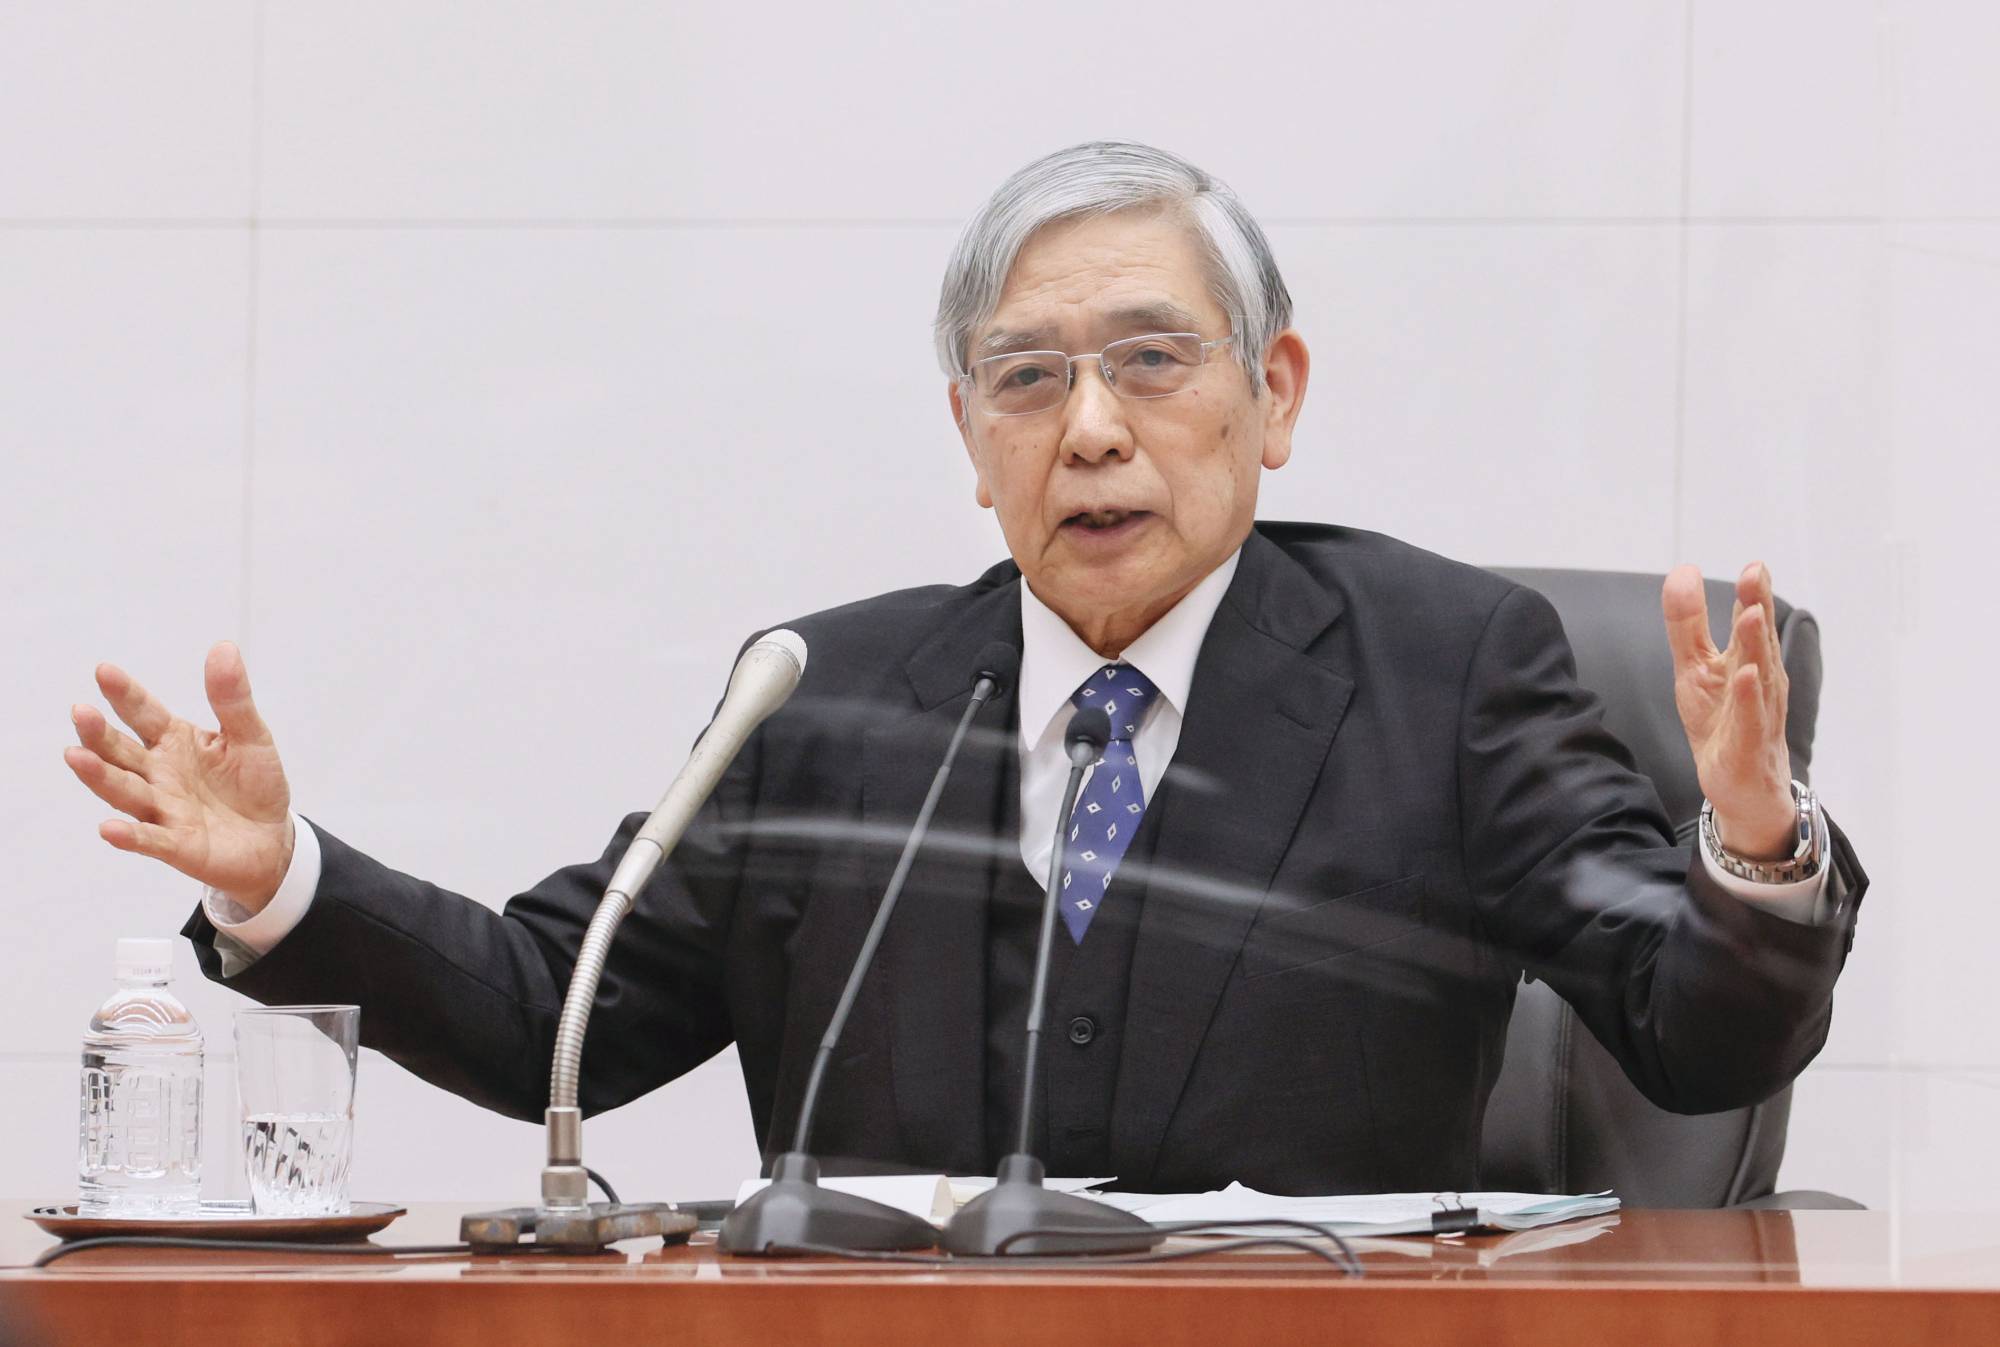 Bank of Japan Gov. Haruhiko Kuroda speaks during a news conference at the central bank's headquarters in Tokyo on Friday. | POOL / VIA KYODO 